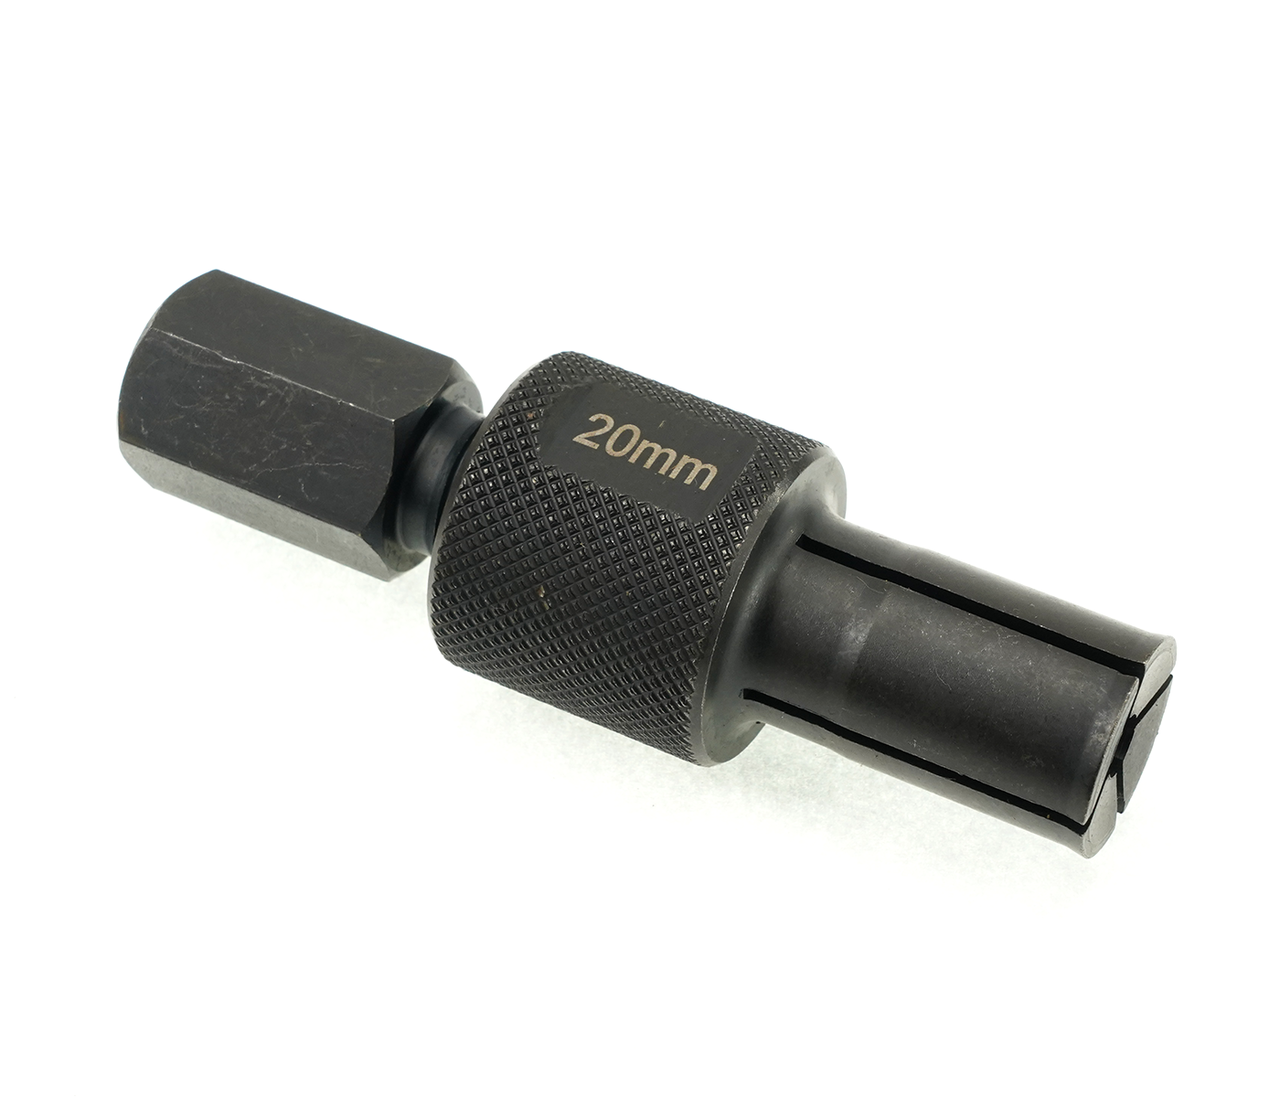 Enduro Puller 20-24mm - Black Oxide, Expanding Collet, Bearing Puller for bearings with 20-24mm IDs